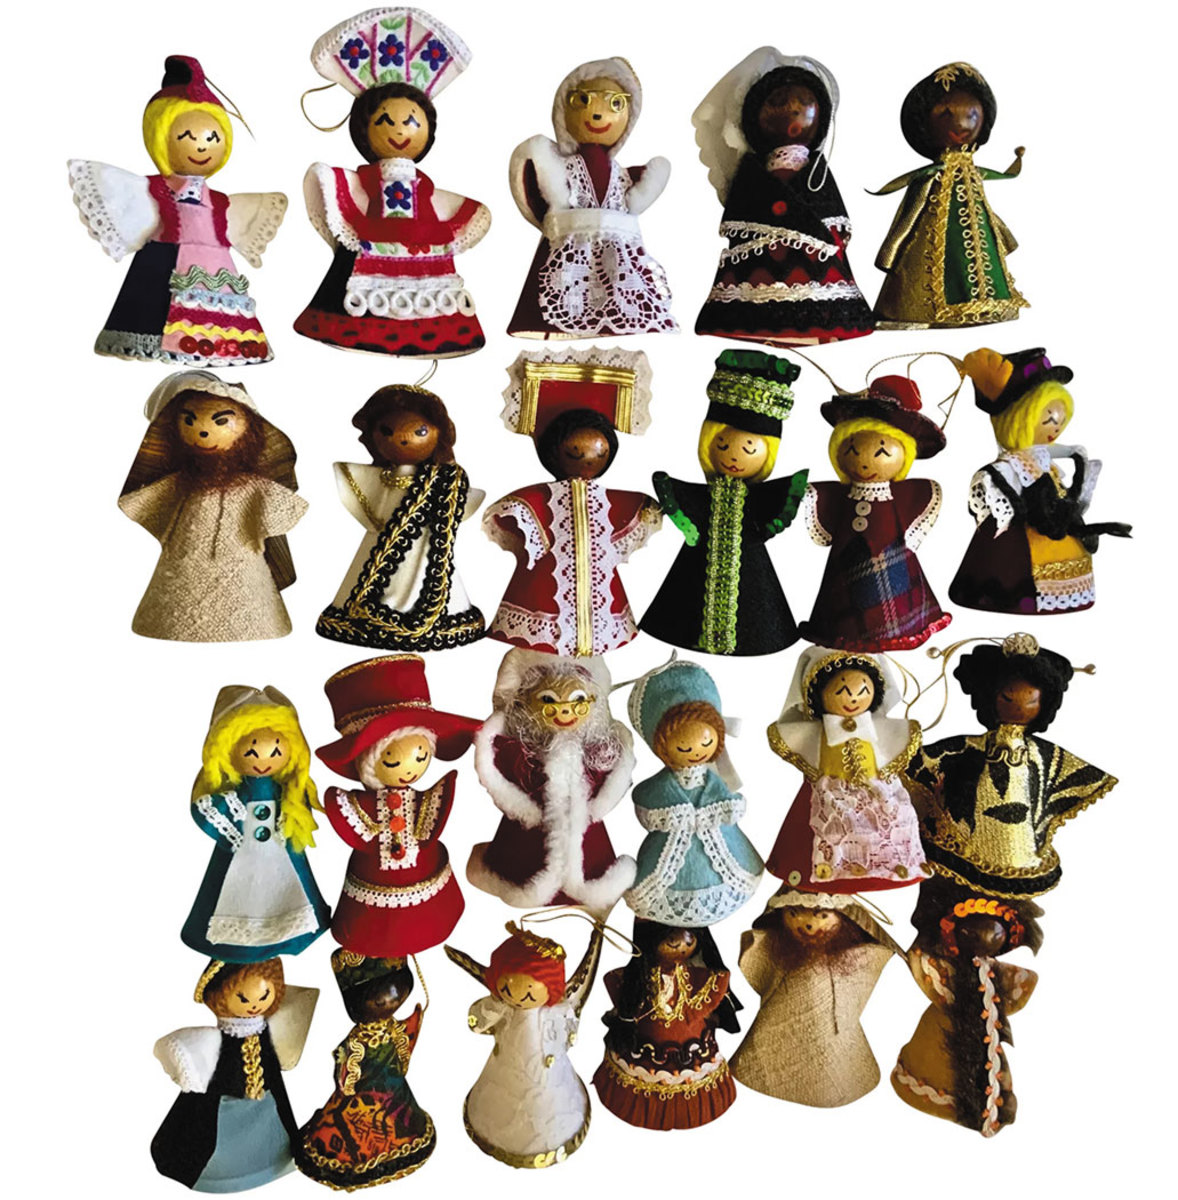 Ornament dolls representing Africa, Bali, Hungary, Japan, Scotland, Thailand, and more: